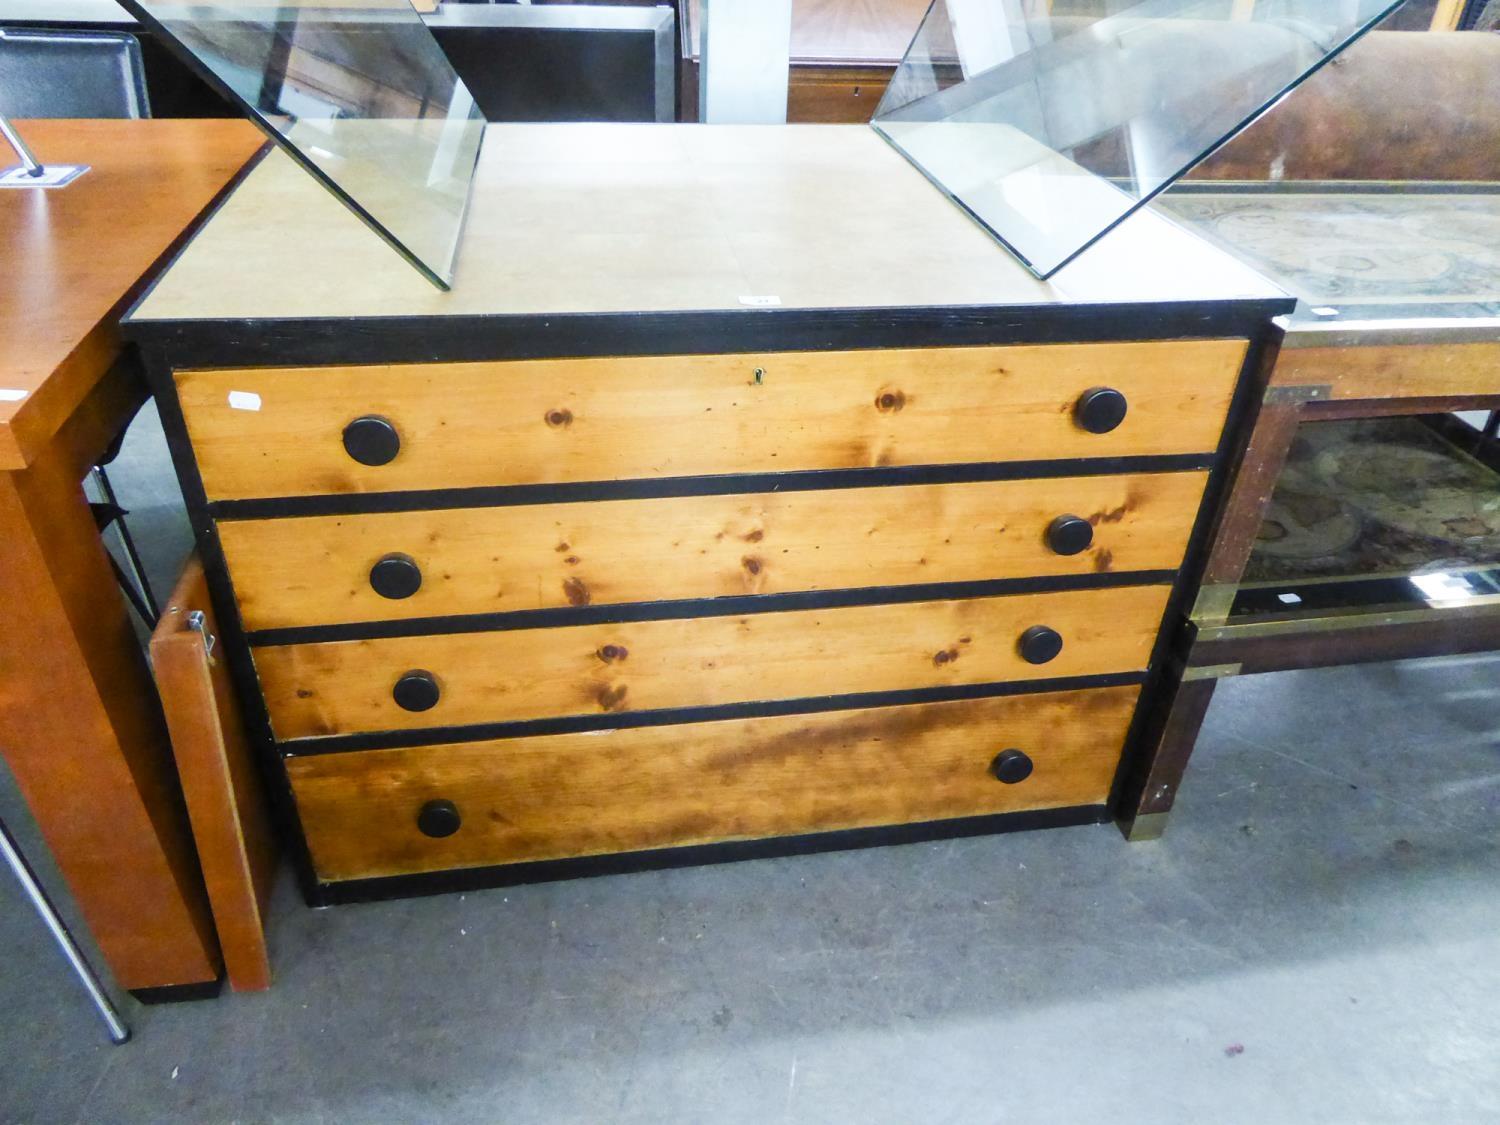 LARGE FOUR DRAWER CHEST/PLAN CHEST WITH BLACK KNOB HANDLES